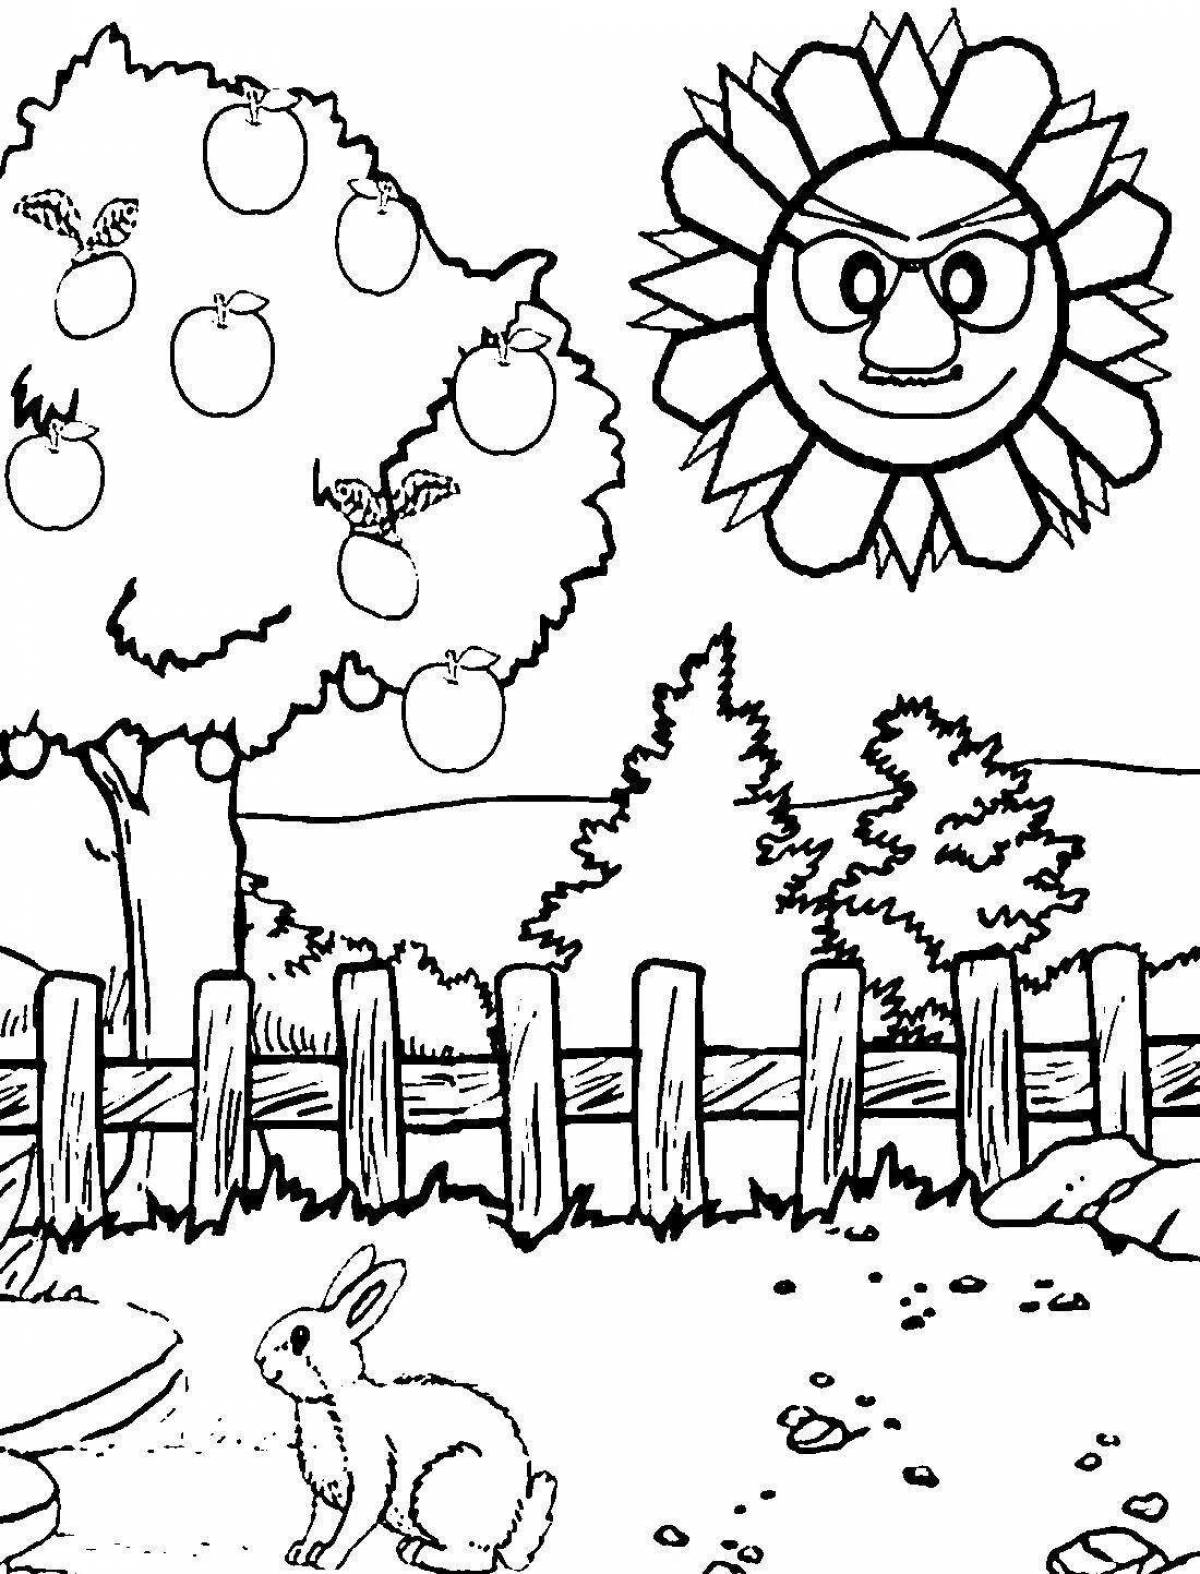 Colorful summer nature coloring book